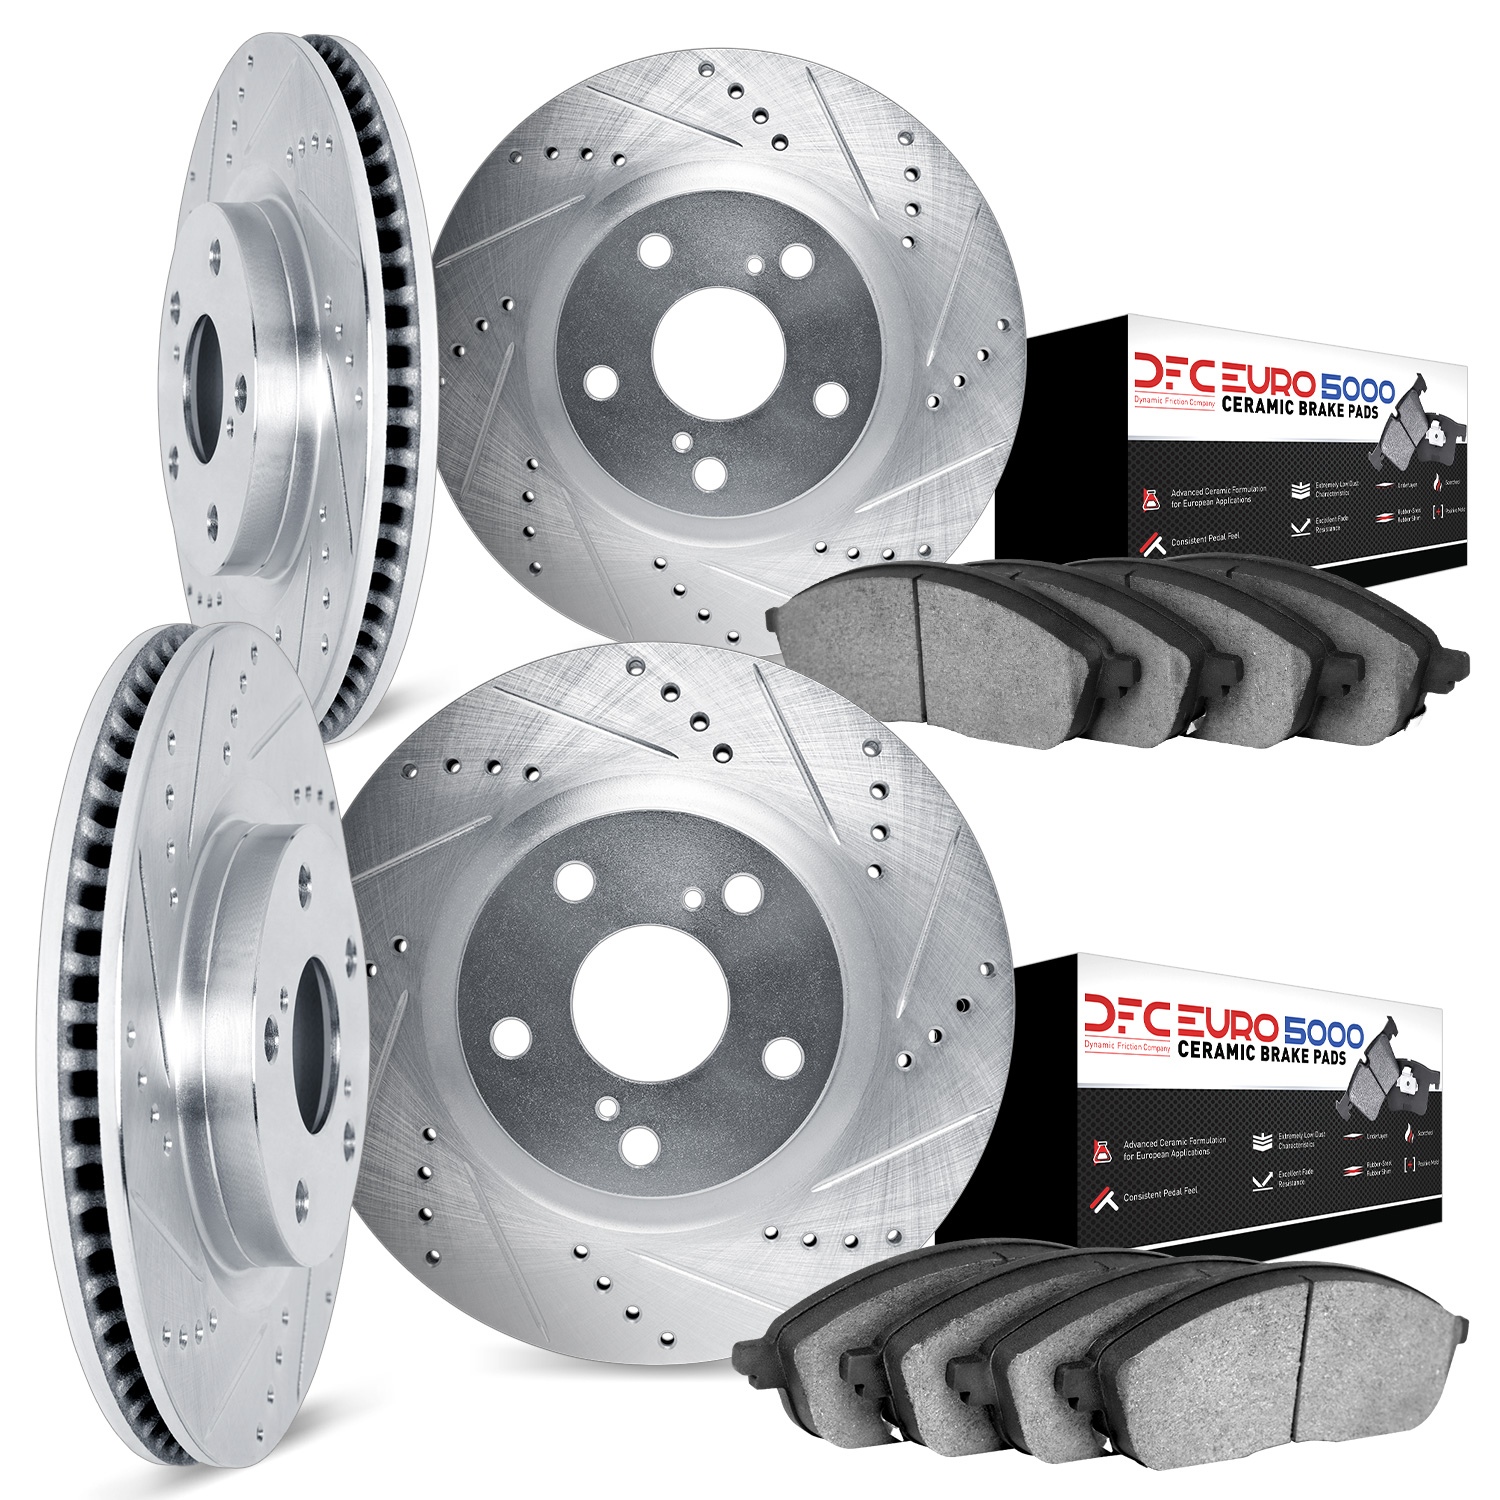 7604-46000 Drilled/Slotted Brake Rotors w/5000 Euro Ceramic Brake Pads Kit [Silver], 2005-2008 GM, Position: Front and Rear